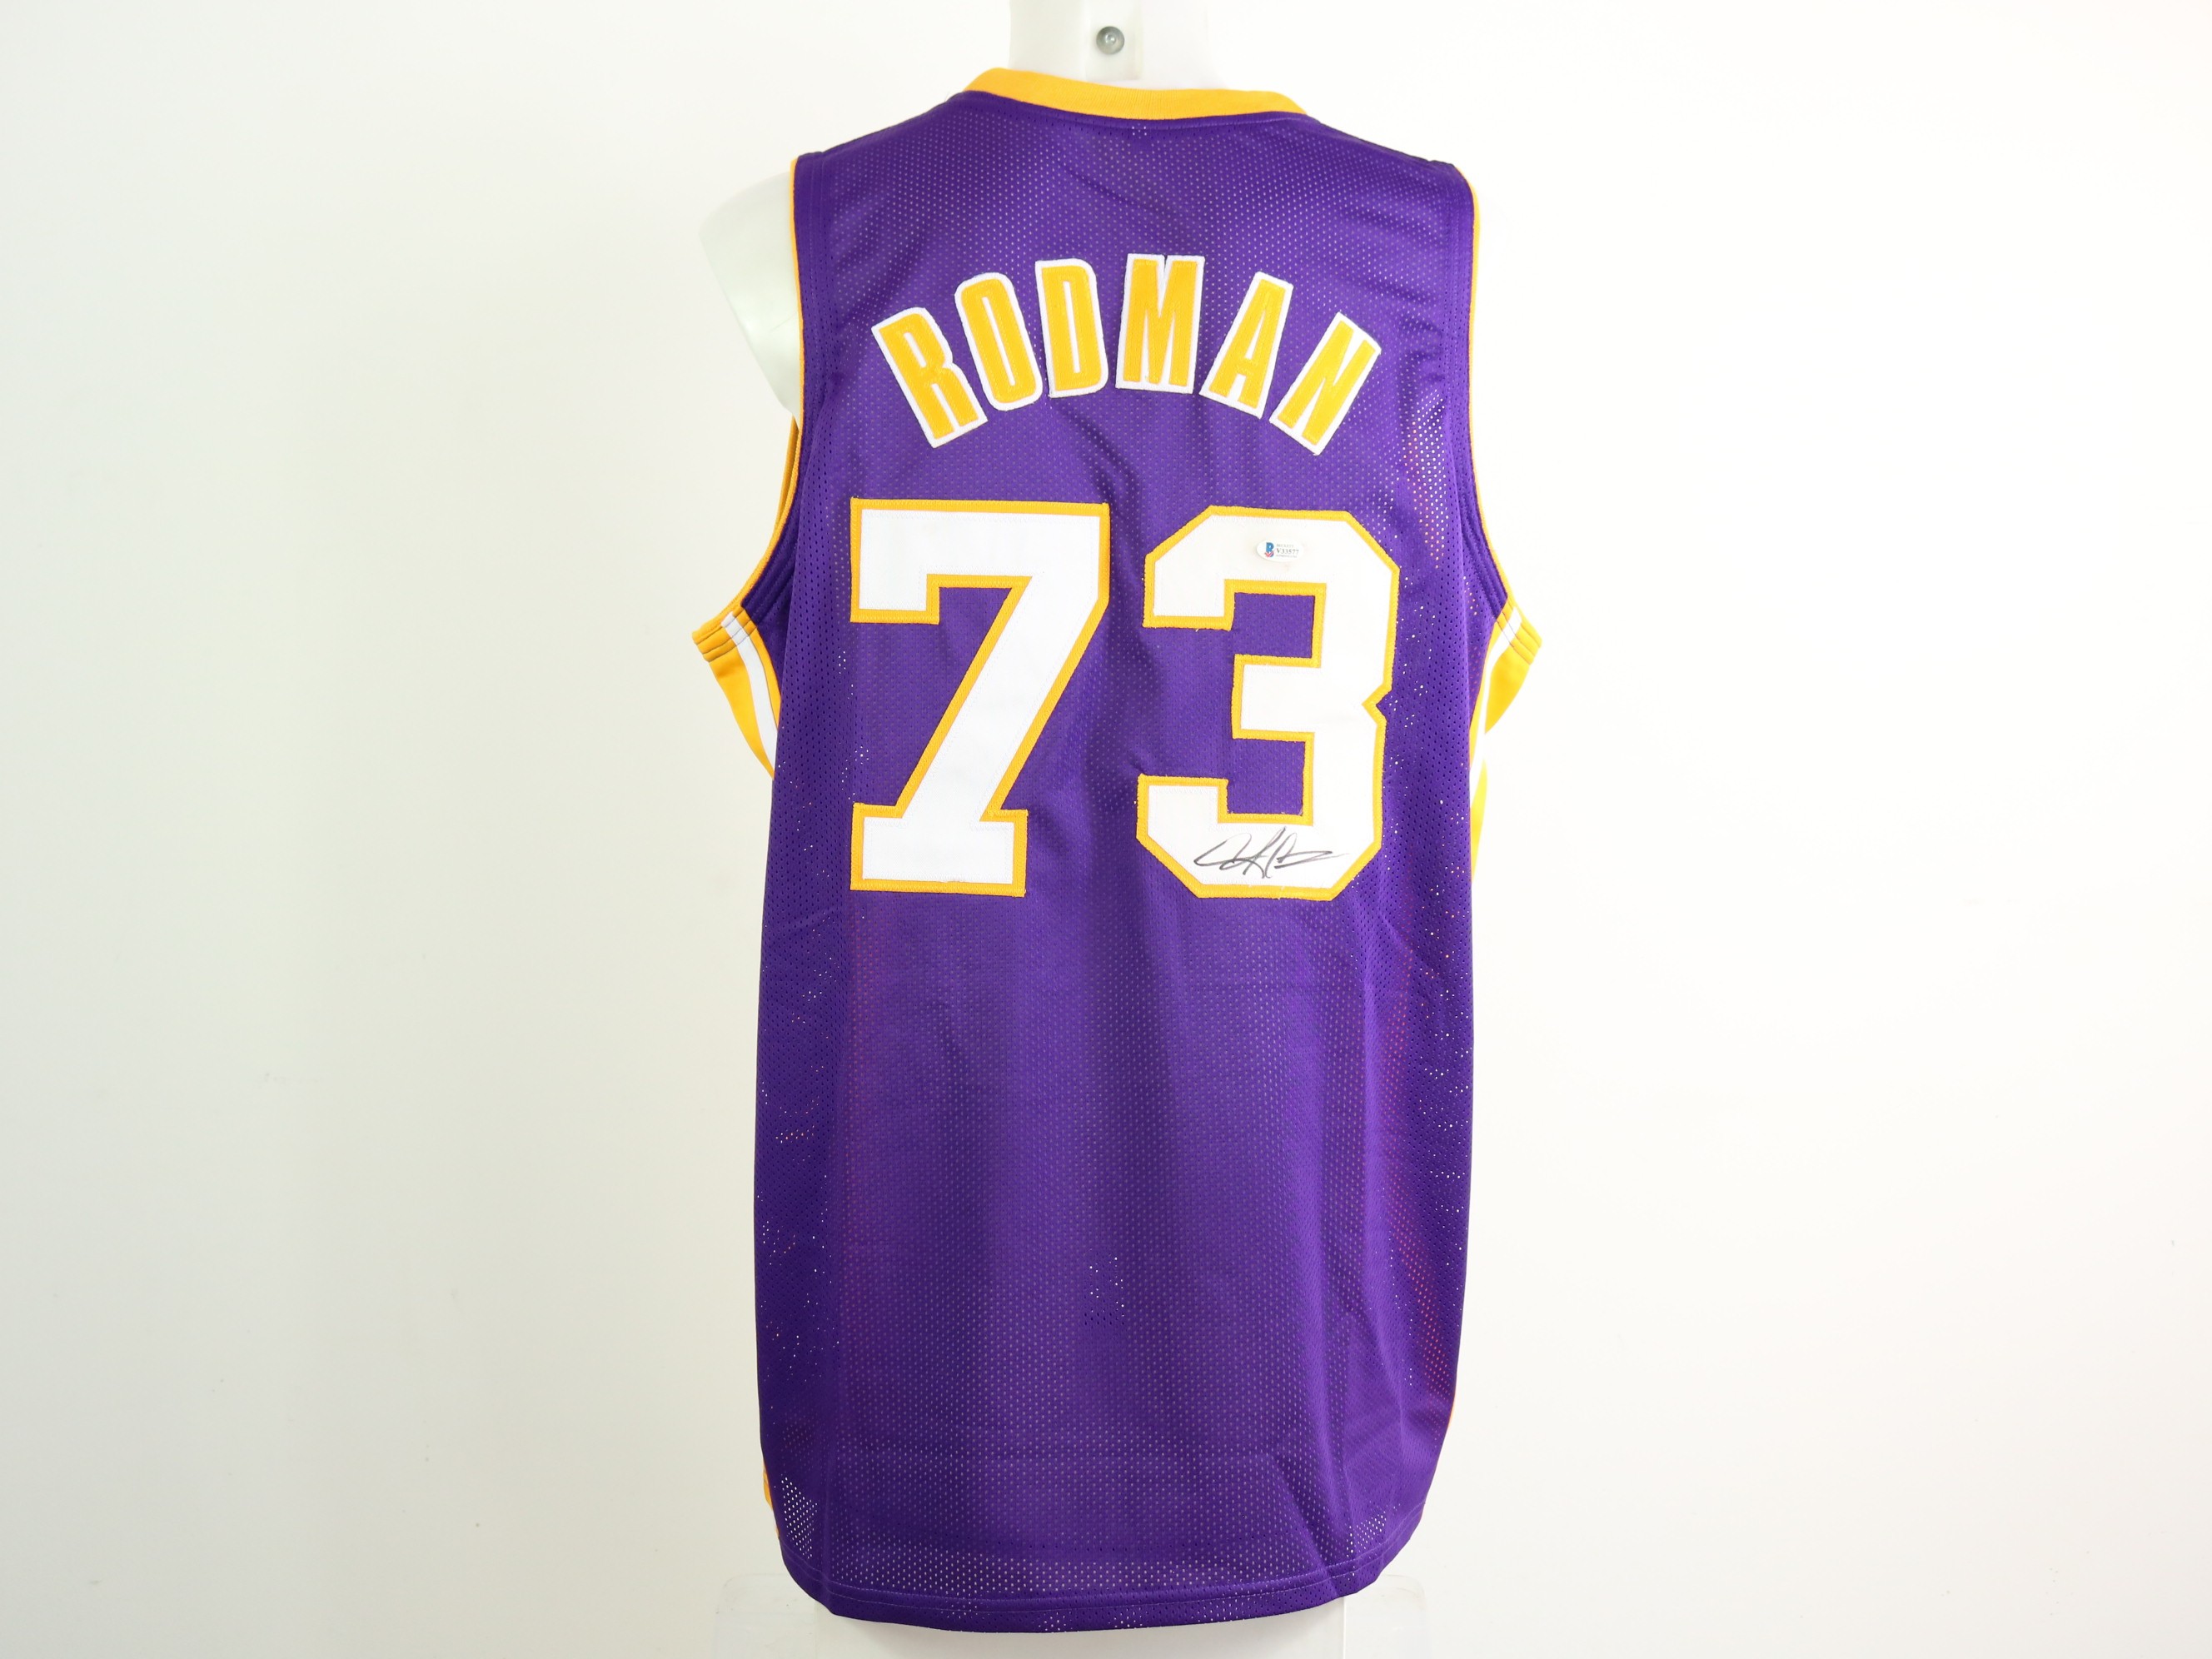 Dennis Rodman L.A. Lakers #73 Authentic Signed Jersey W/ Beckett COA